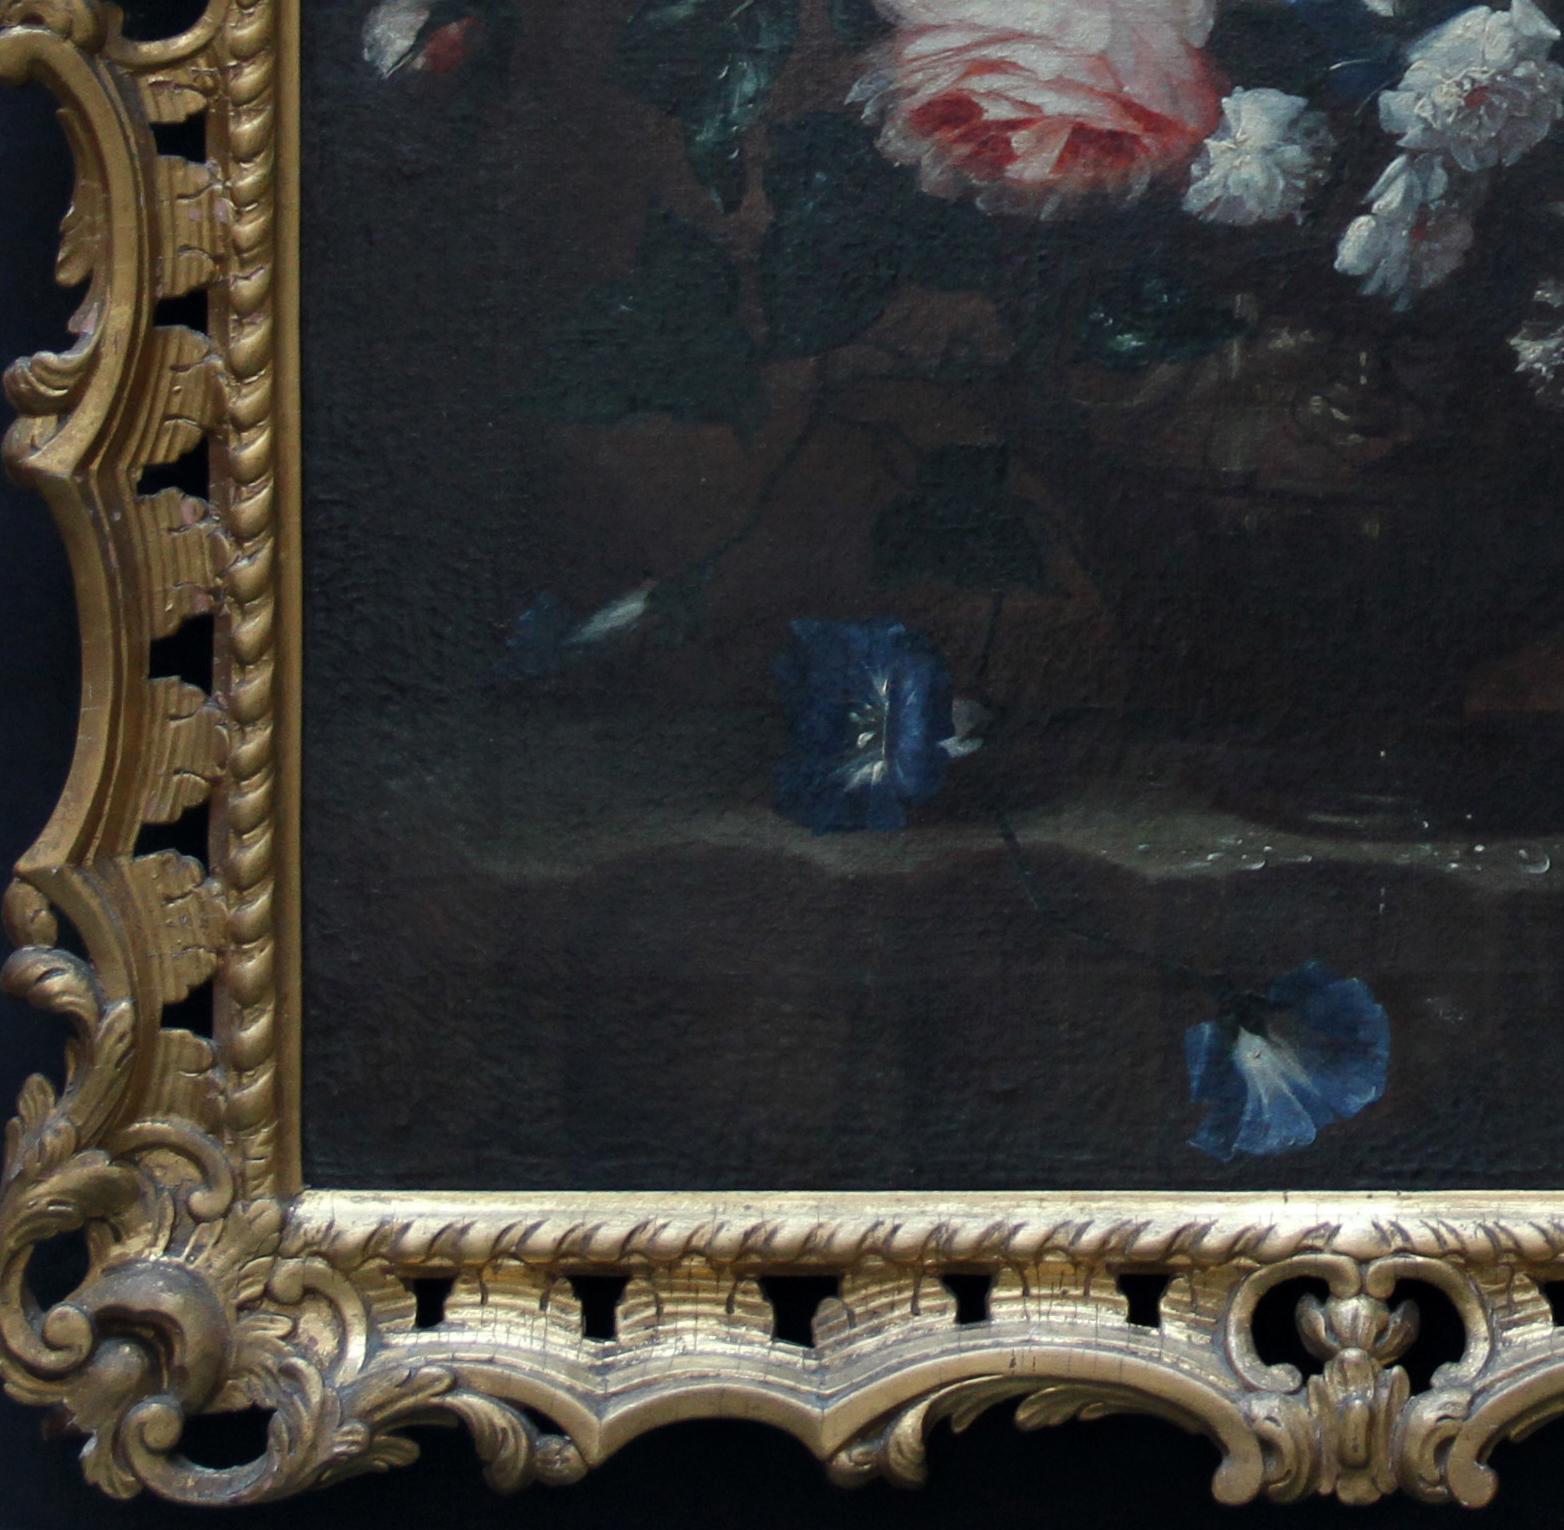 Floral Arrangement - Dutch Old Master art oil painting flowers rose rococo frame - Old Masters Painting by Unknown